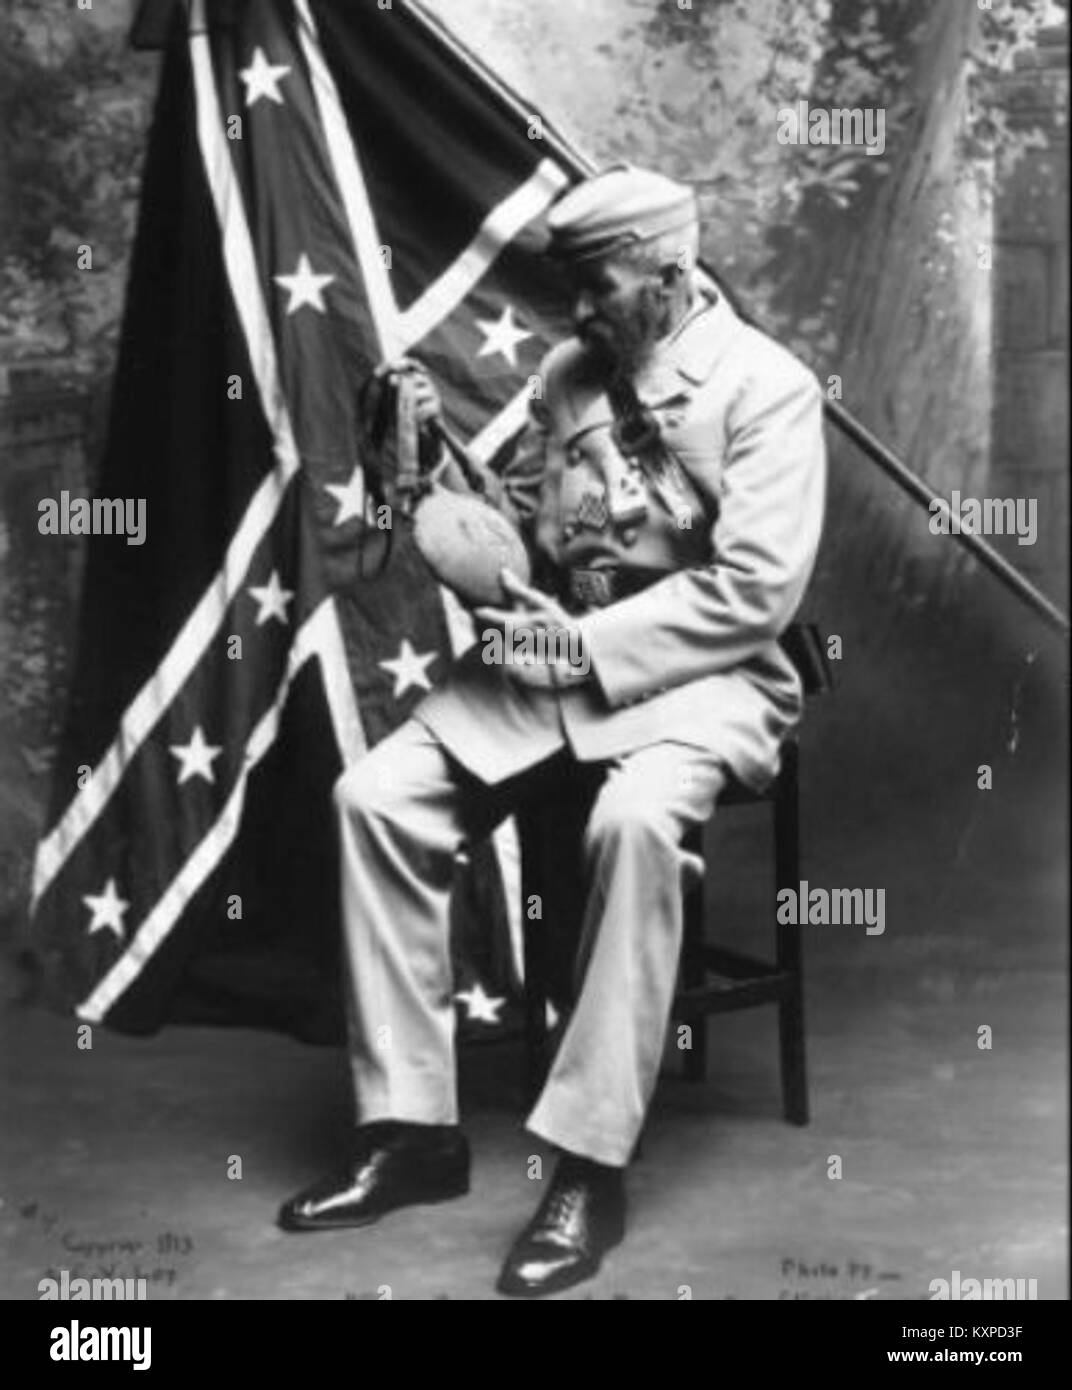 Confederate soldier & battle flag Stock Photo